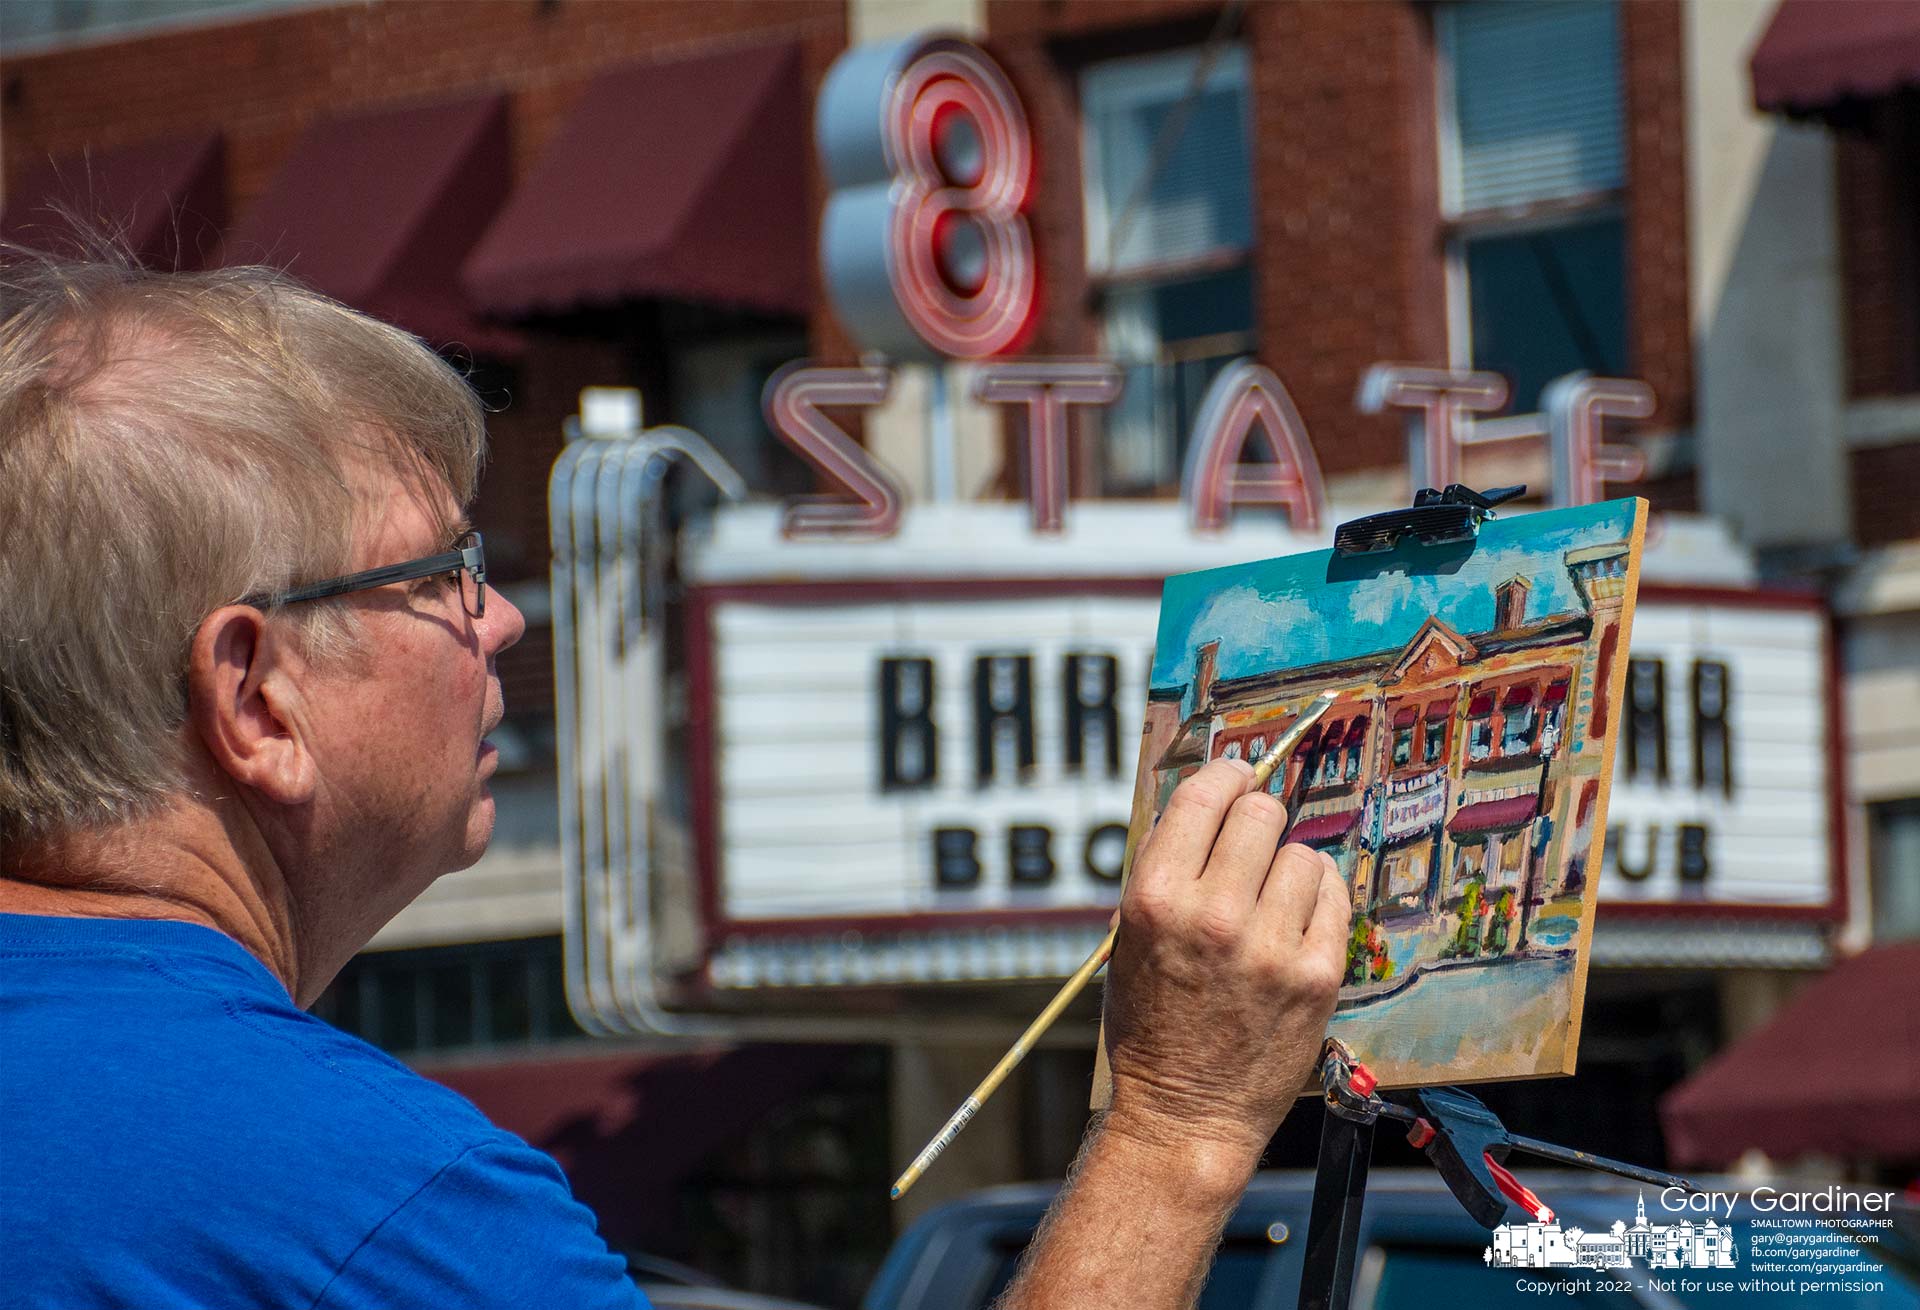 A Plein Air painter puts final touches on his artwork depicting 8 State, the building on State Street that once was a movie theater and is now a bbq restaurant. My Final Photo for September 15, 2022.